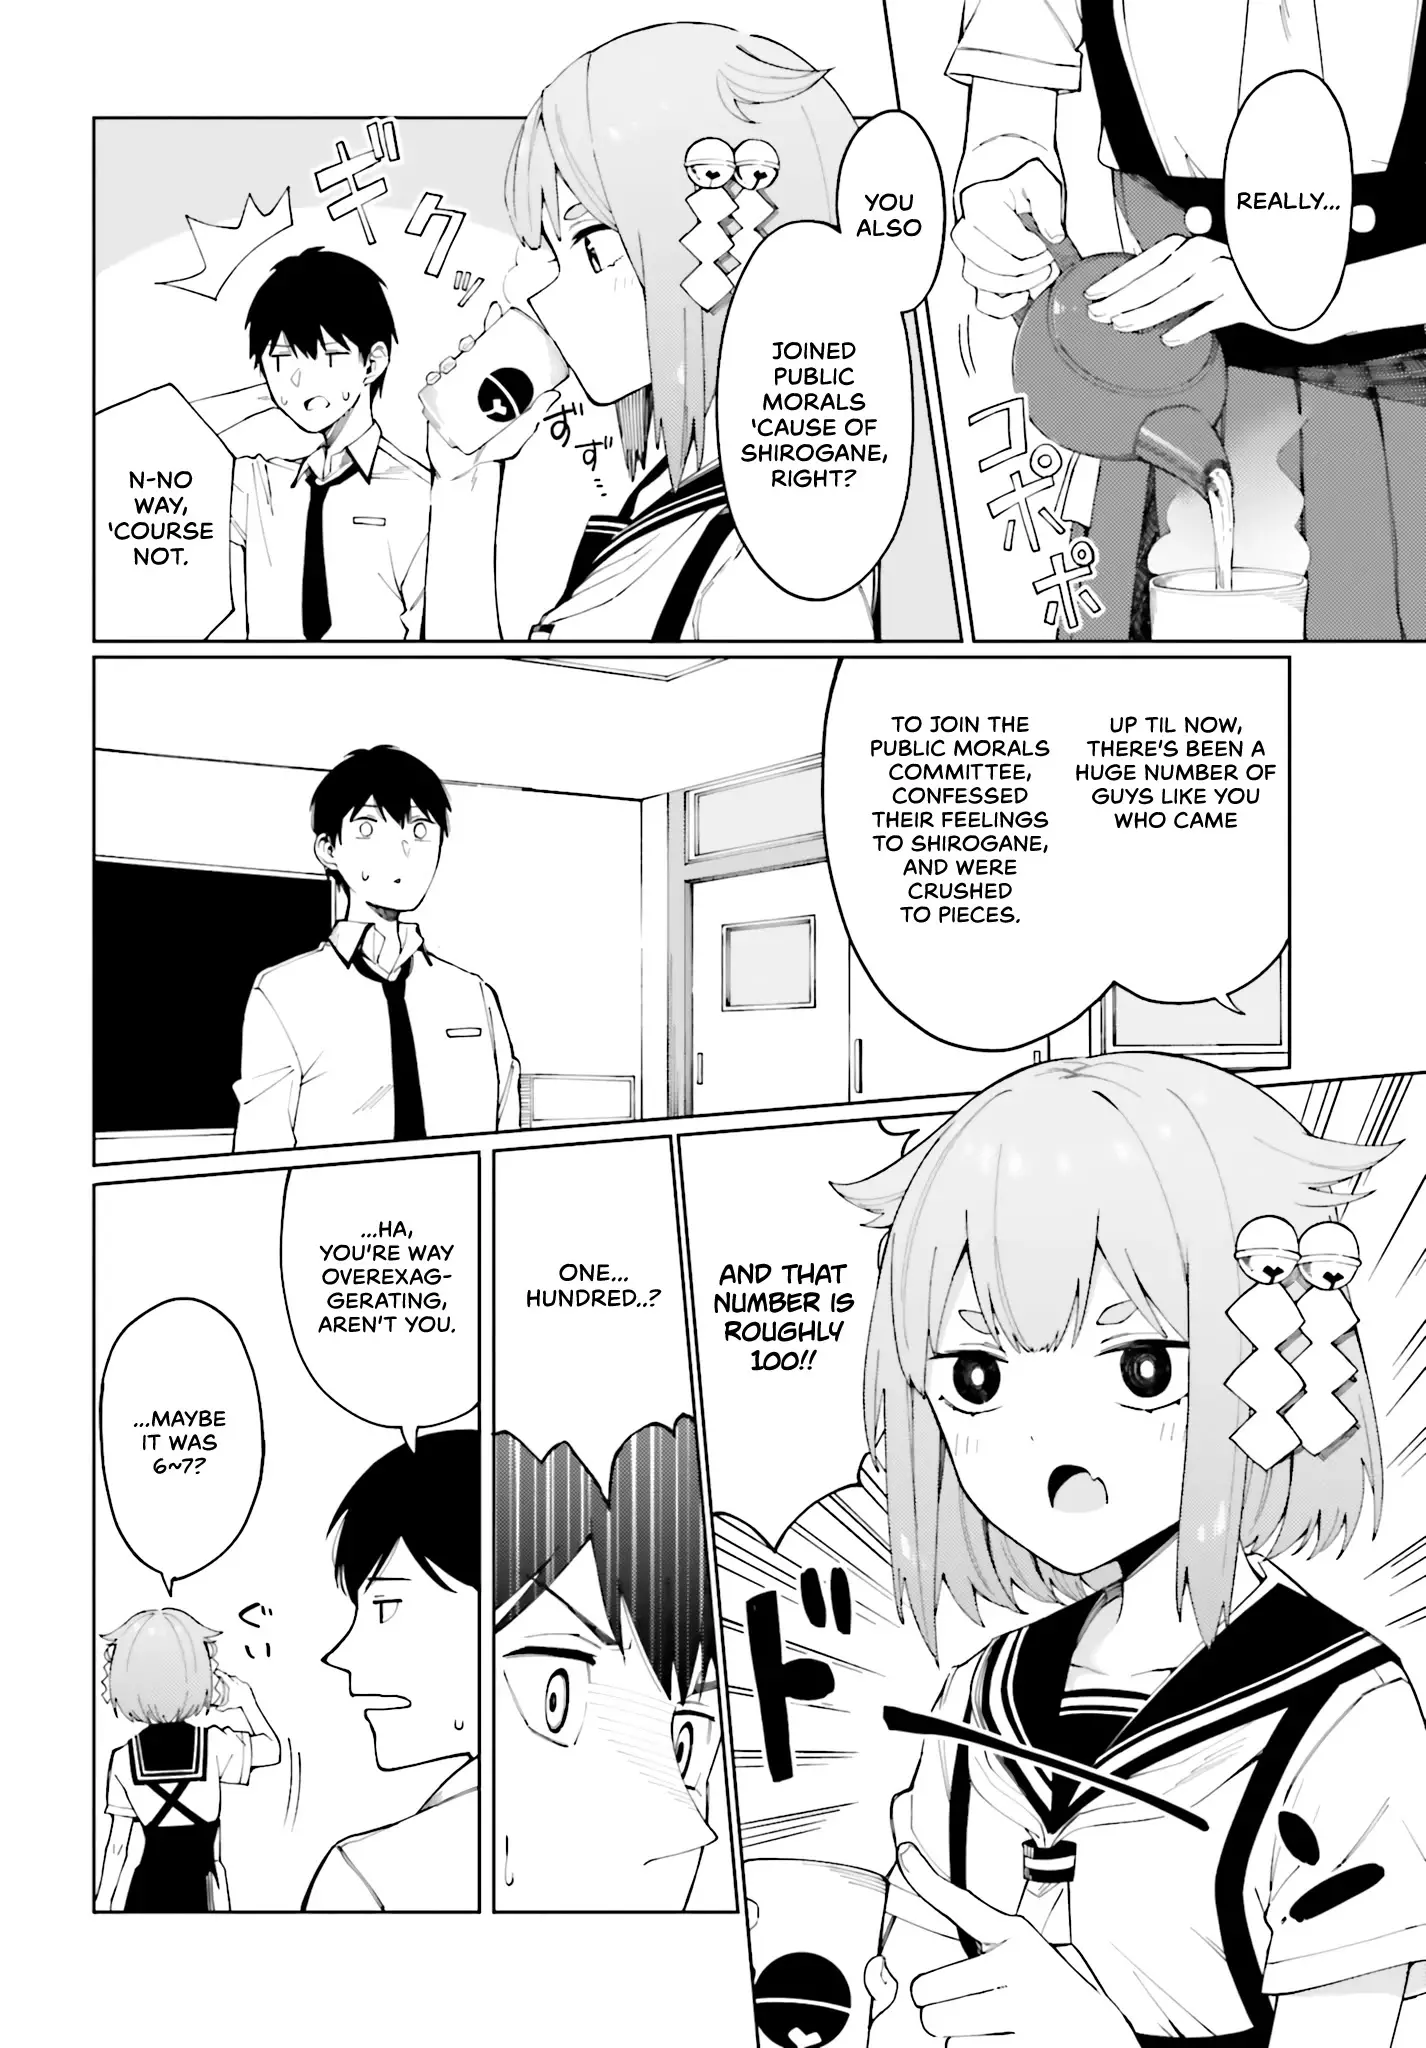 I Don't Understand Shirogane-San's Facial Expression At All - 1 page 5